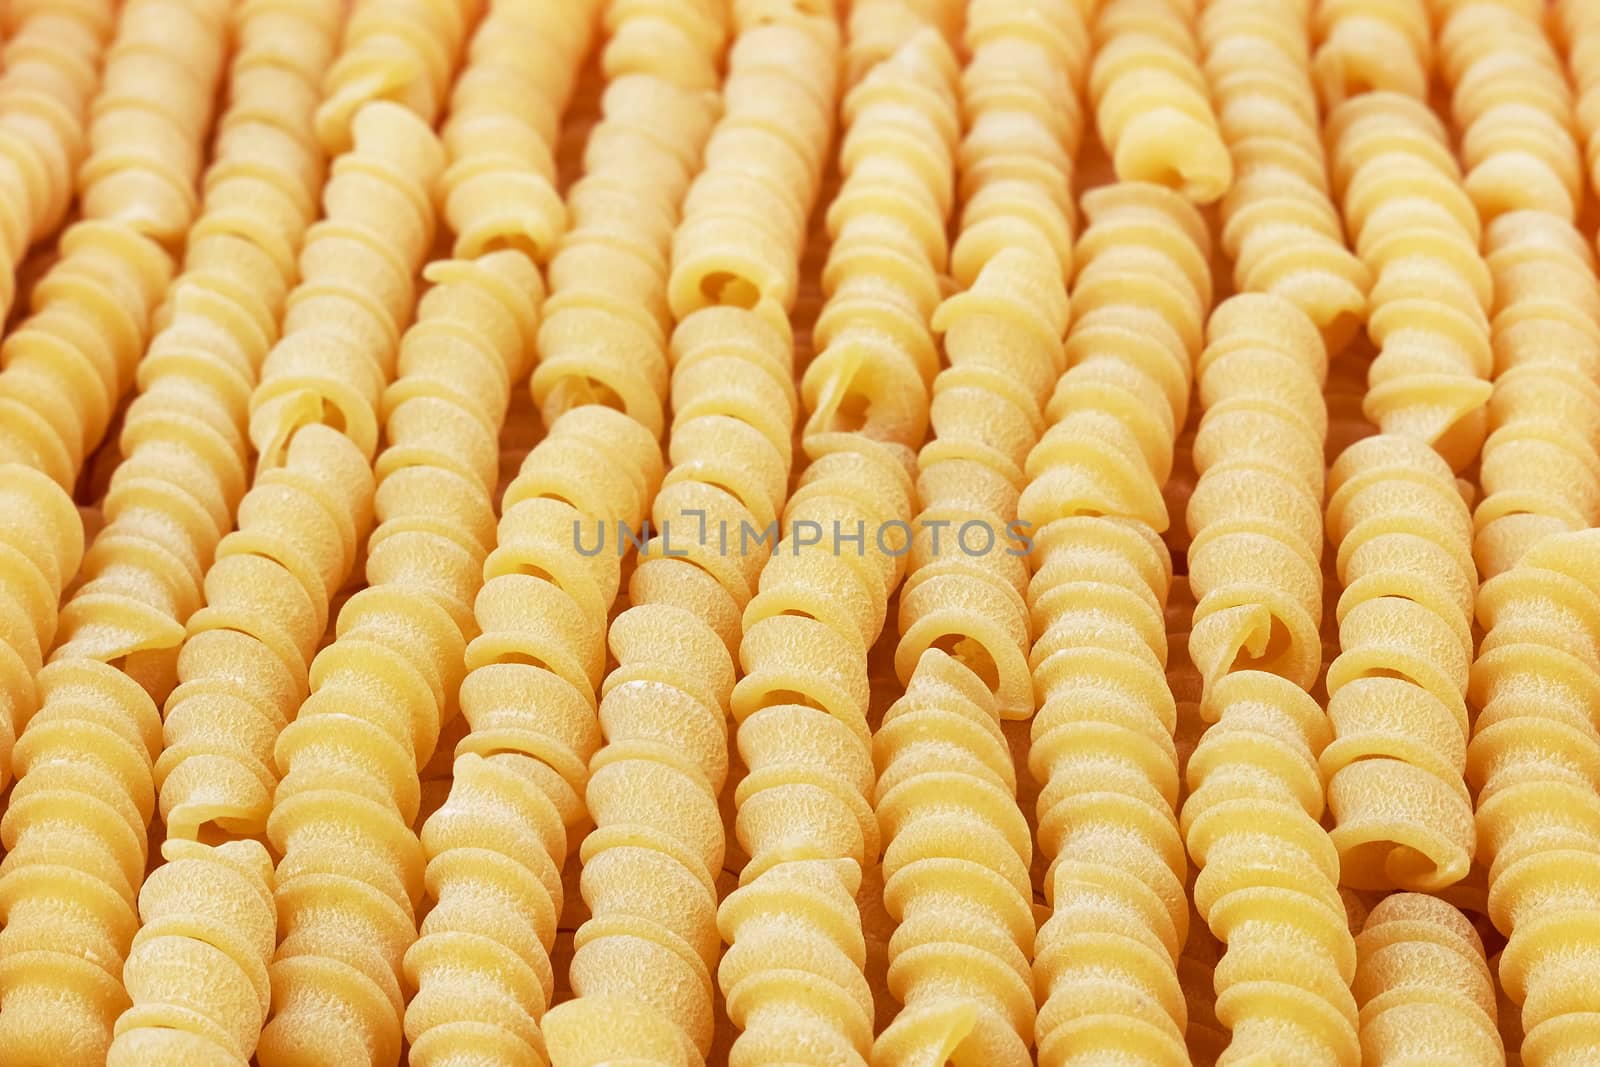 Uncooked spiral pasta by leventina